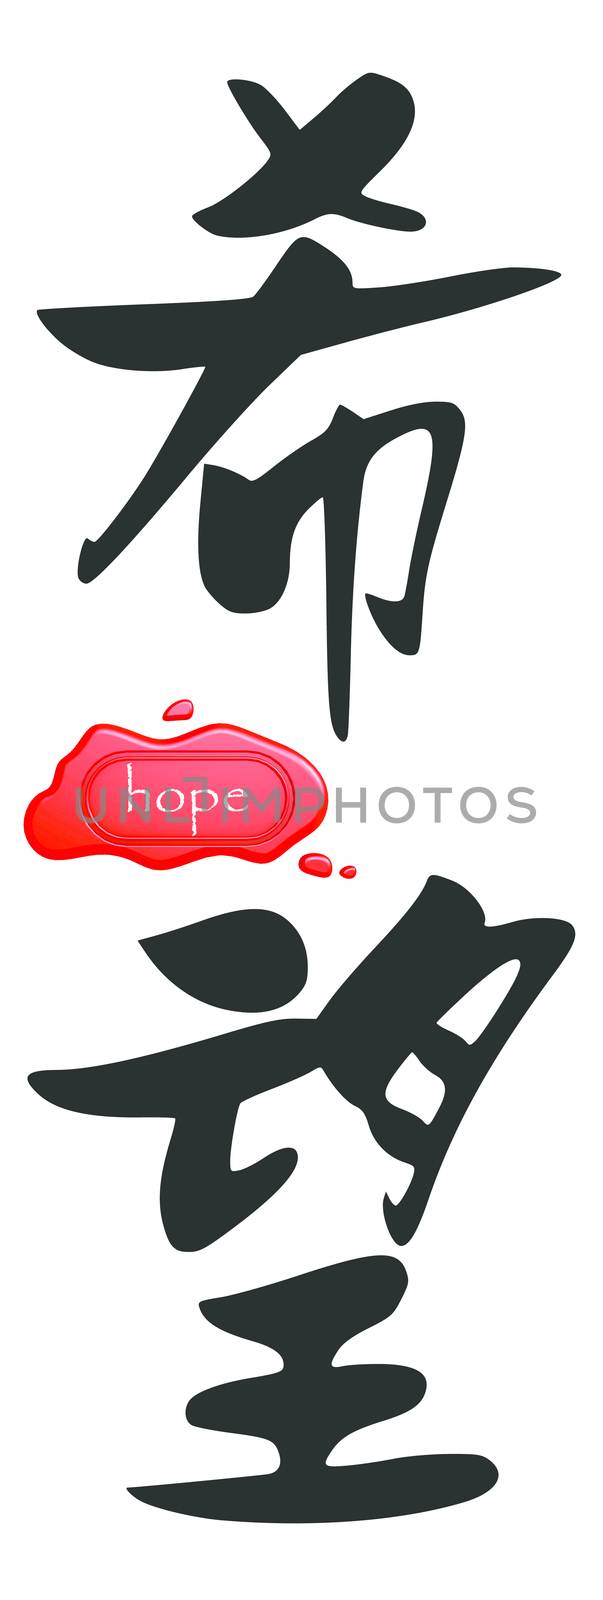 Hope in Chinese